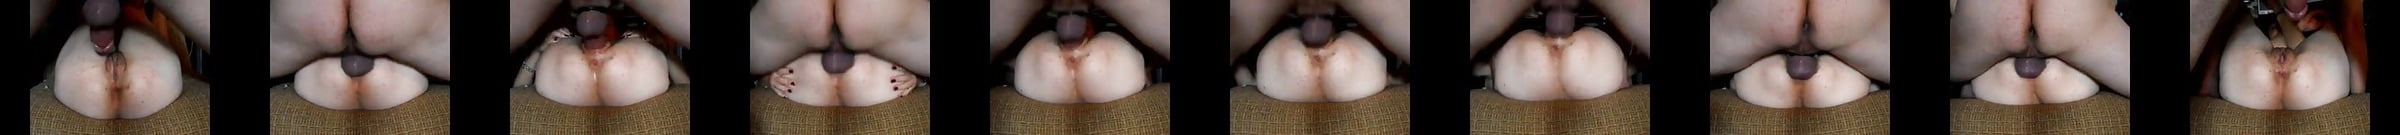 Featured Big Cock Porn Videos 66 Xhamster